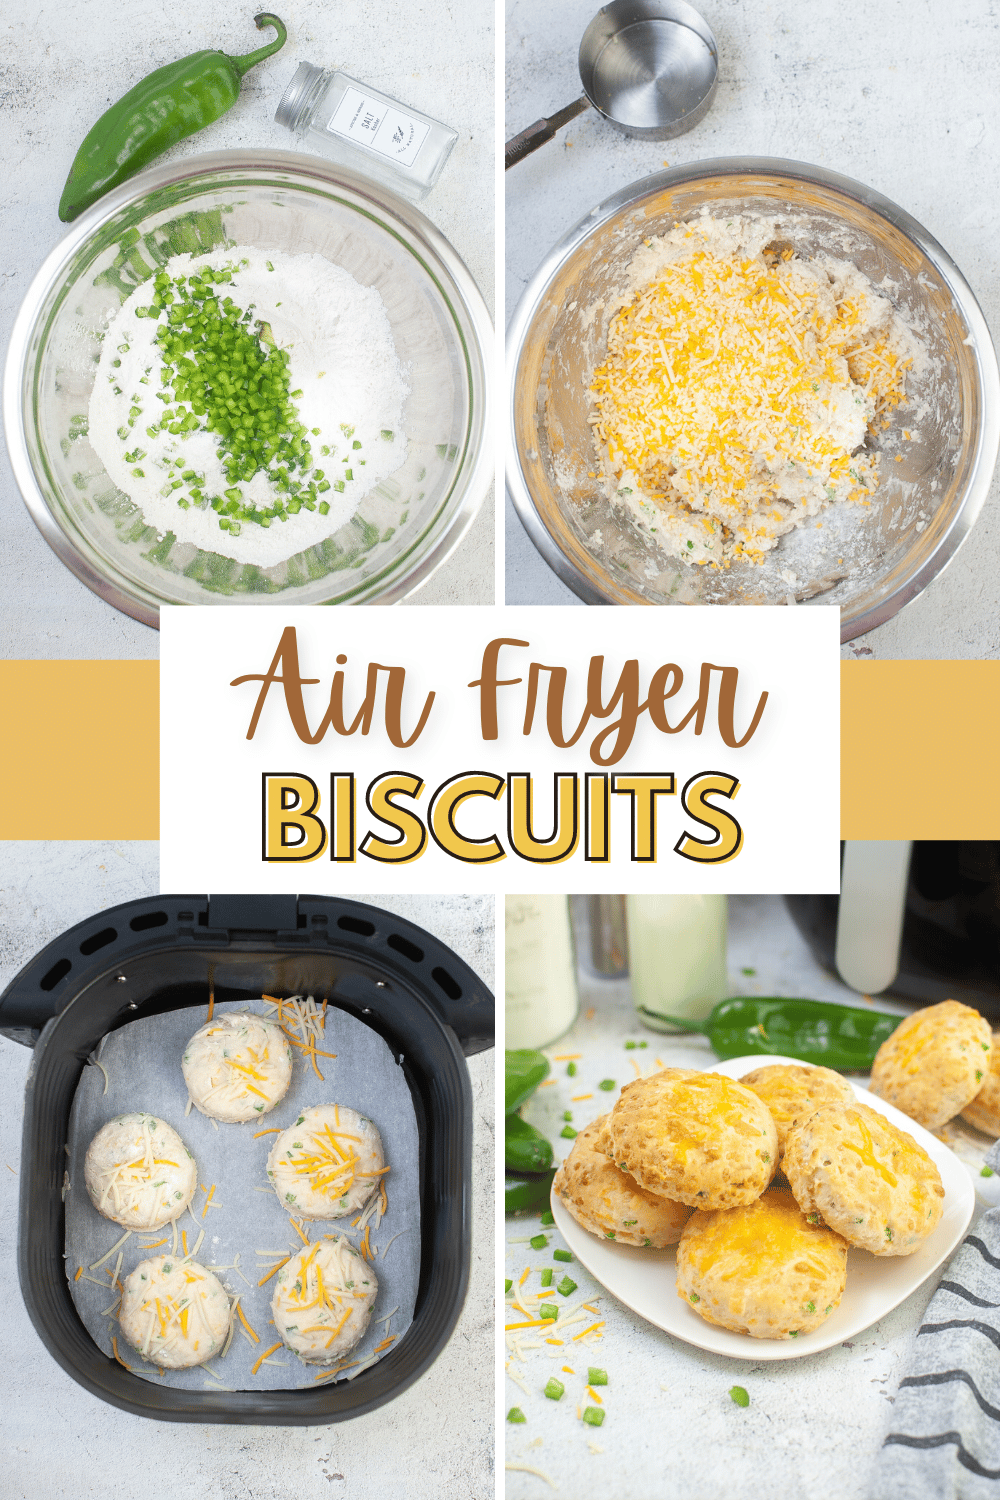 These Air Fryer Biscuits are flaky, cheesy, and full of savory spicy flavor. If you're looking for a simple homemade biscuit try this recipe. #airfryerbiscuits #airfryer #biscuits via @wondermomwannab